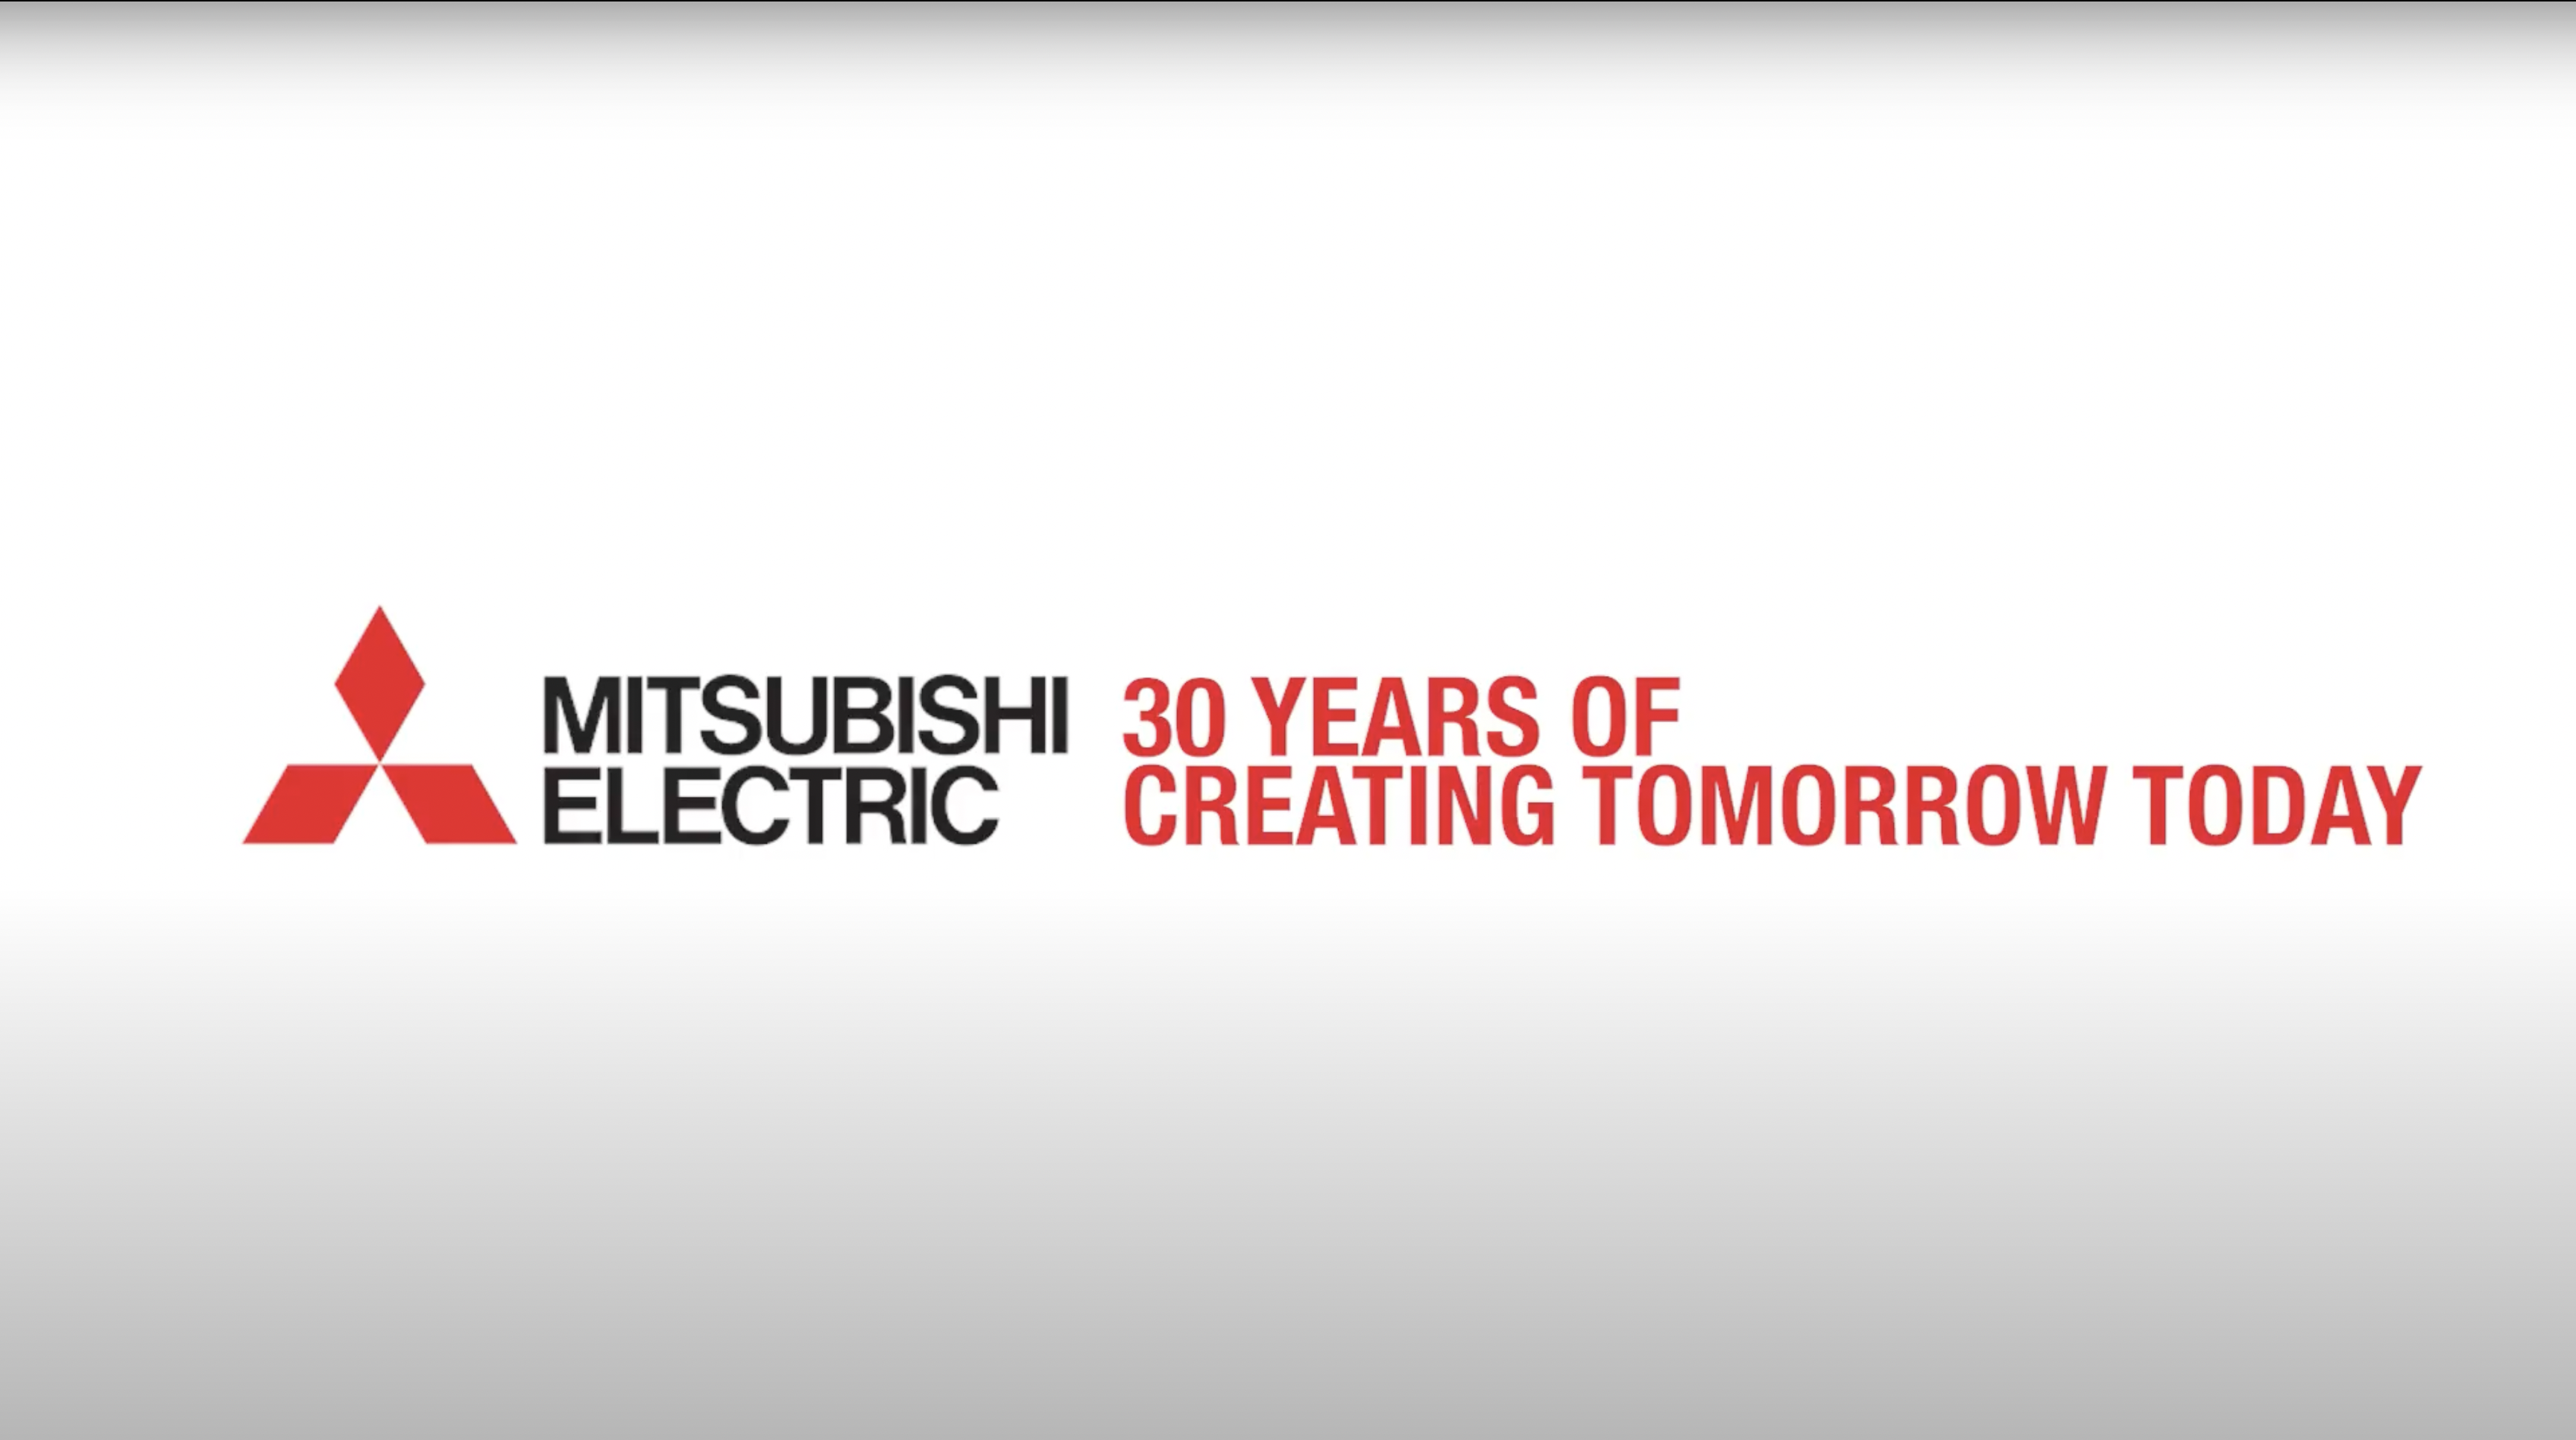 Promotional Video created for MERL Mitsubishi's 30th Anniversary